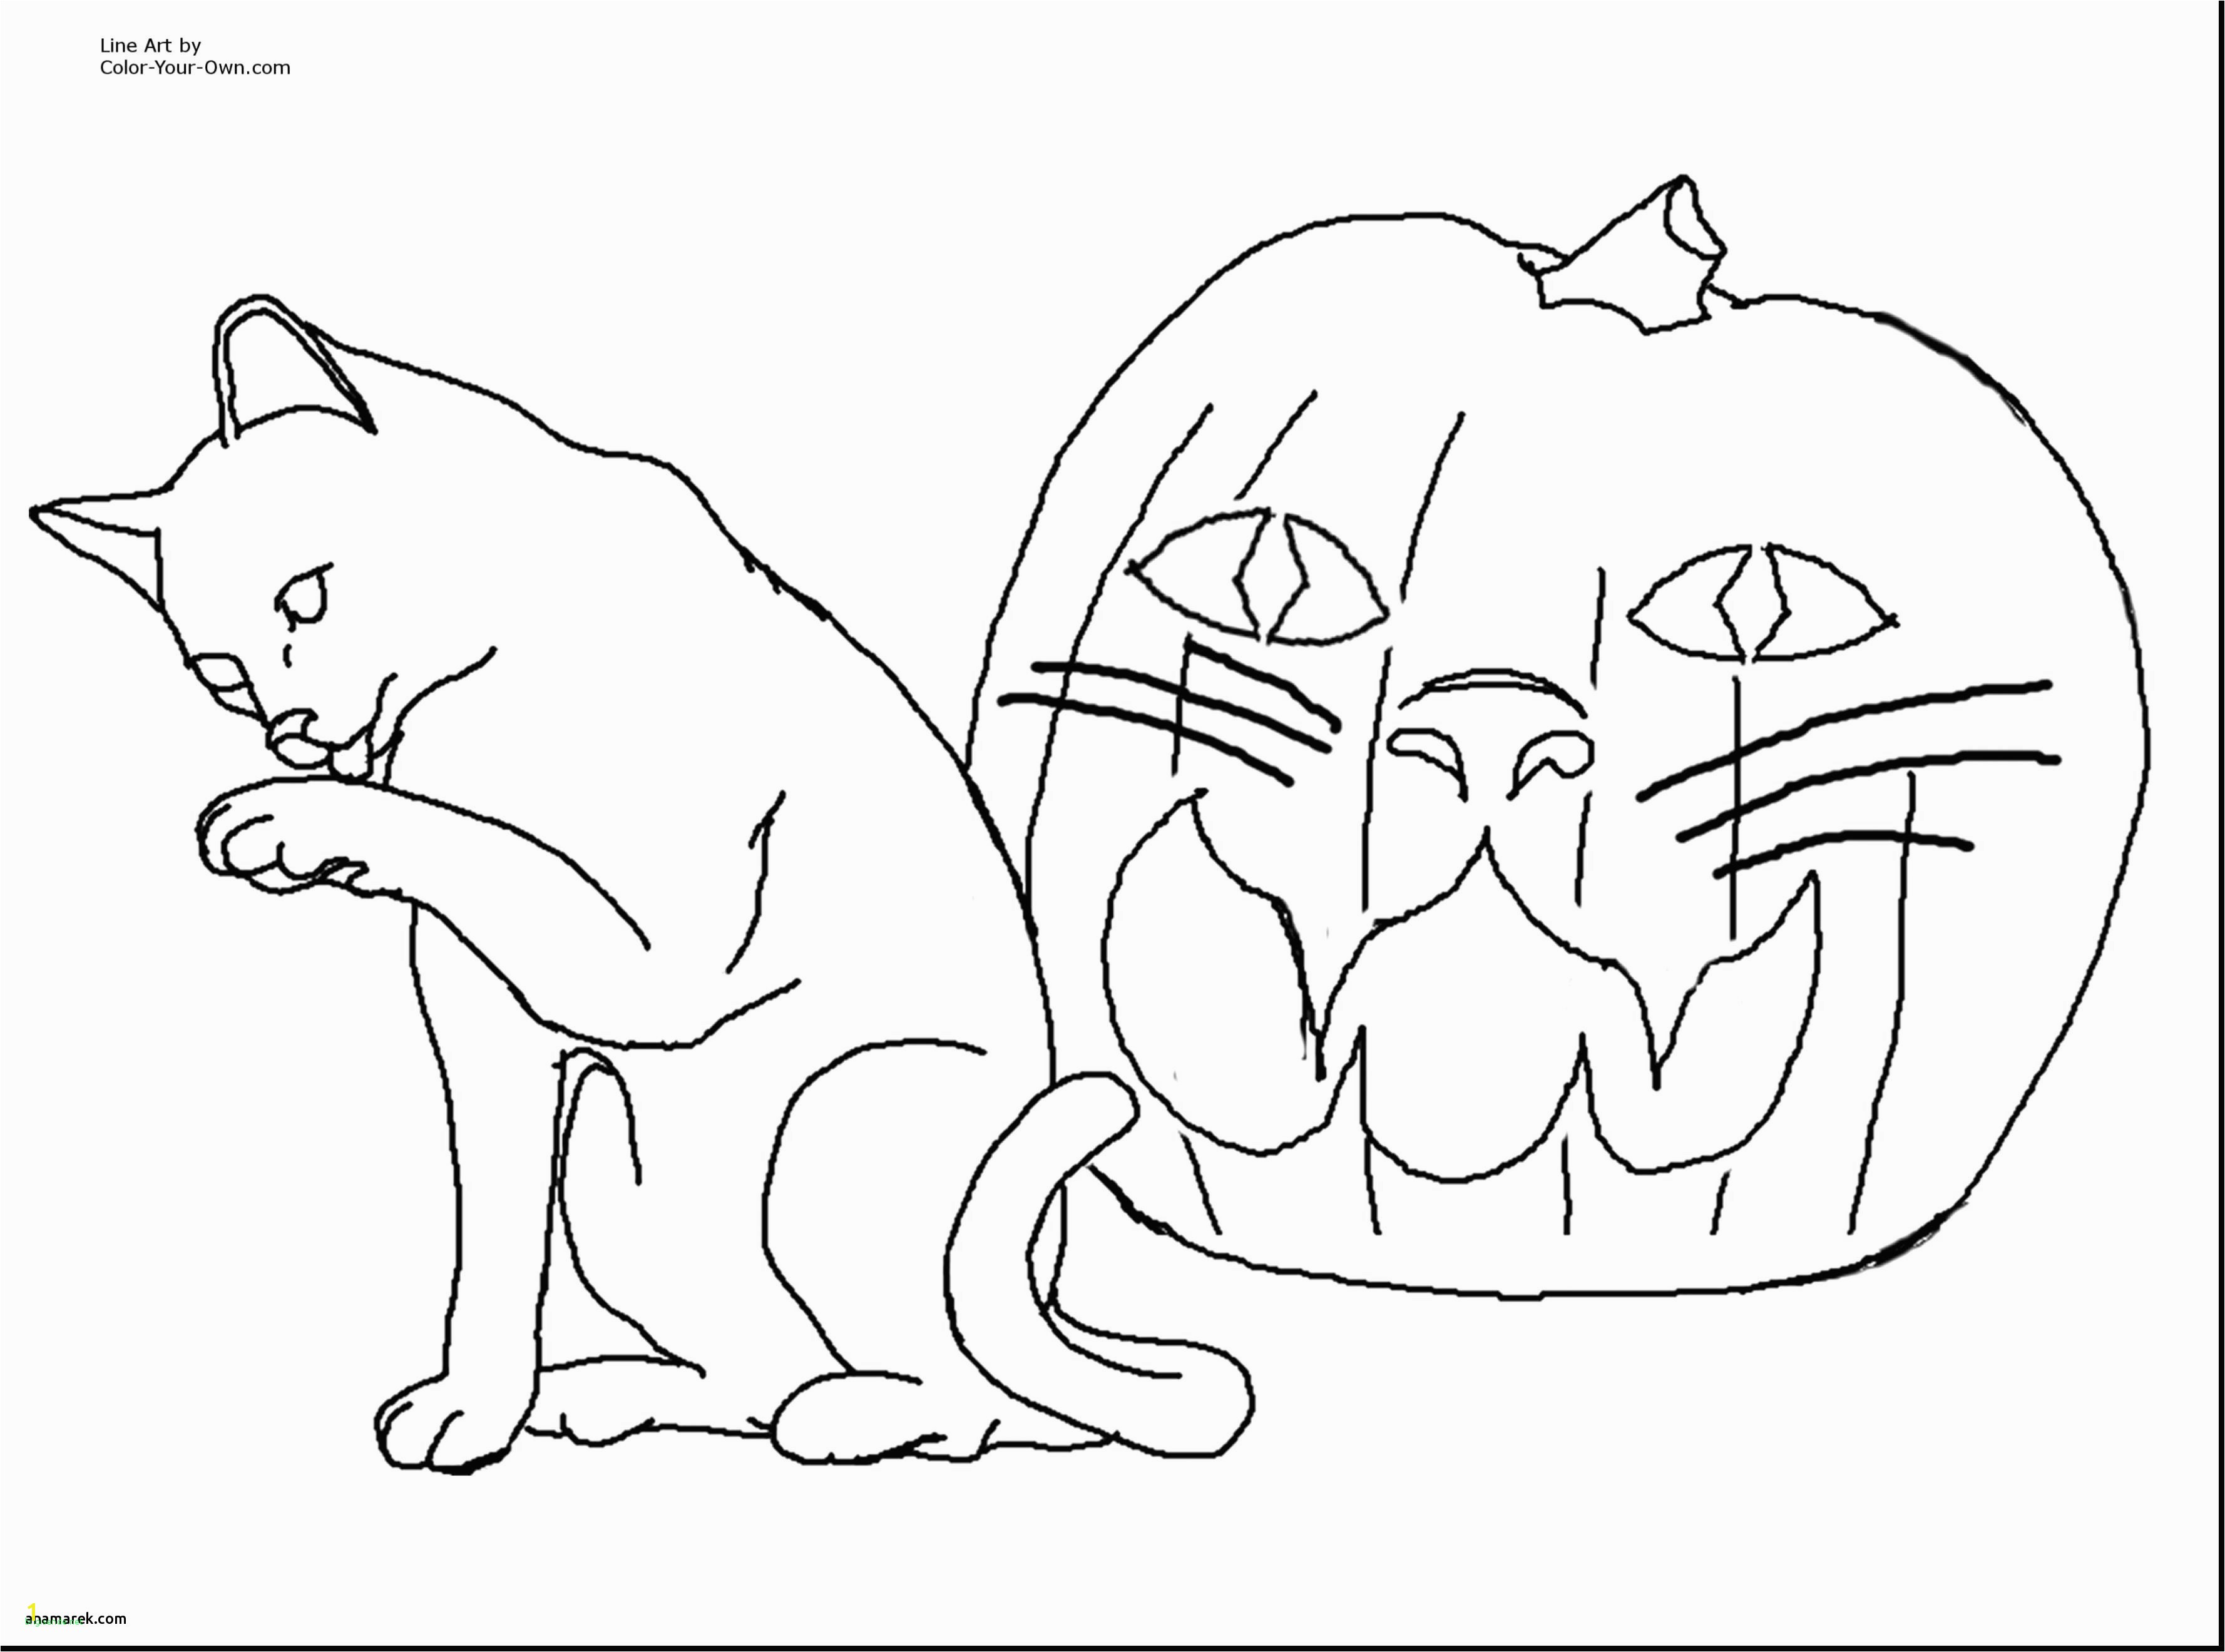 Kids Coloring Pages for Girls Halloween Cats In Costumes Lovely Cat Printable Coloring Pages Inspirational Best